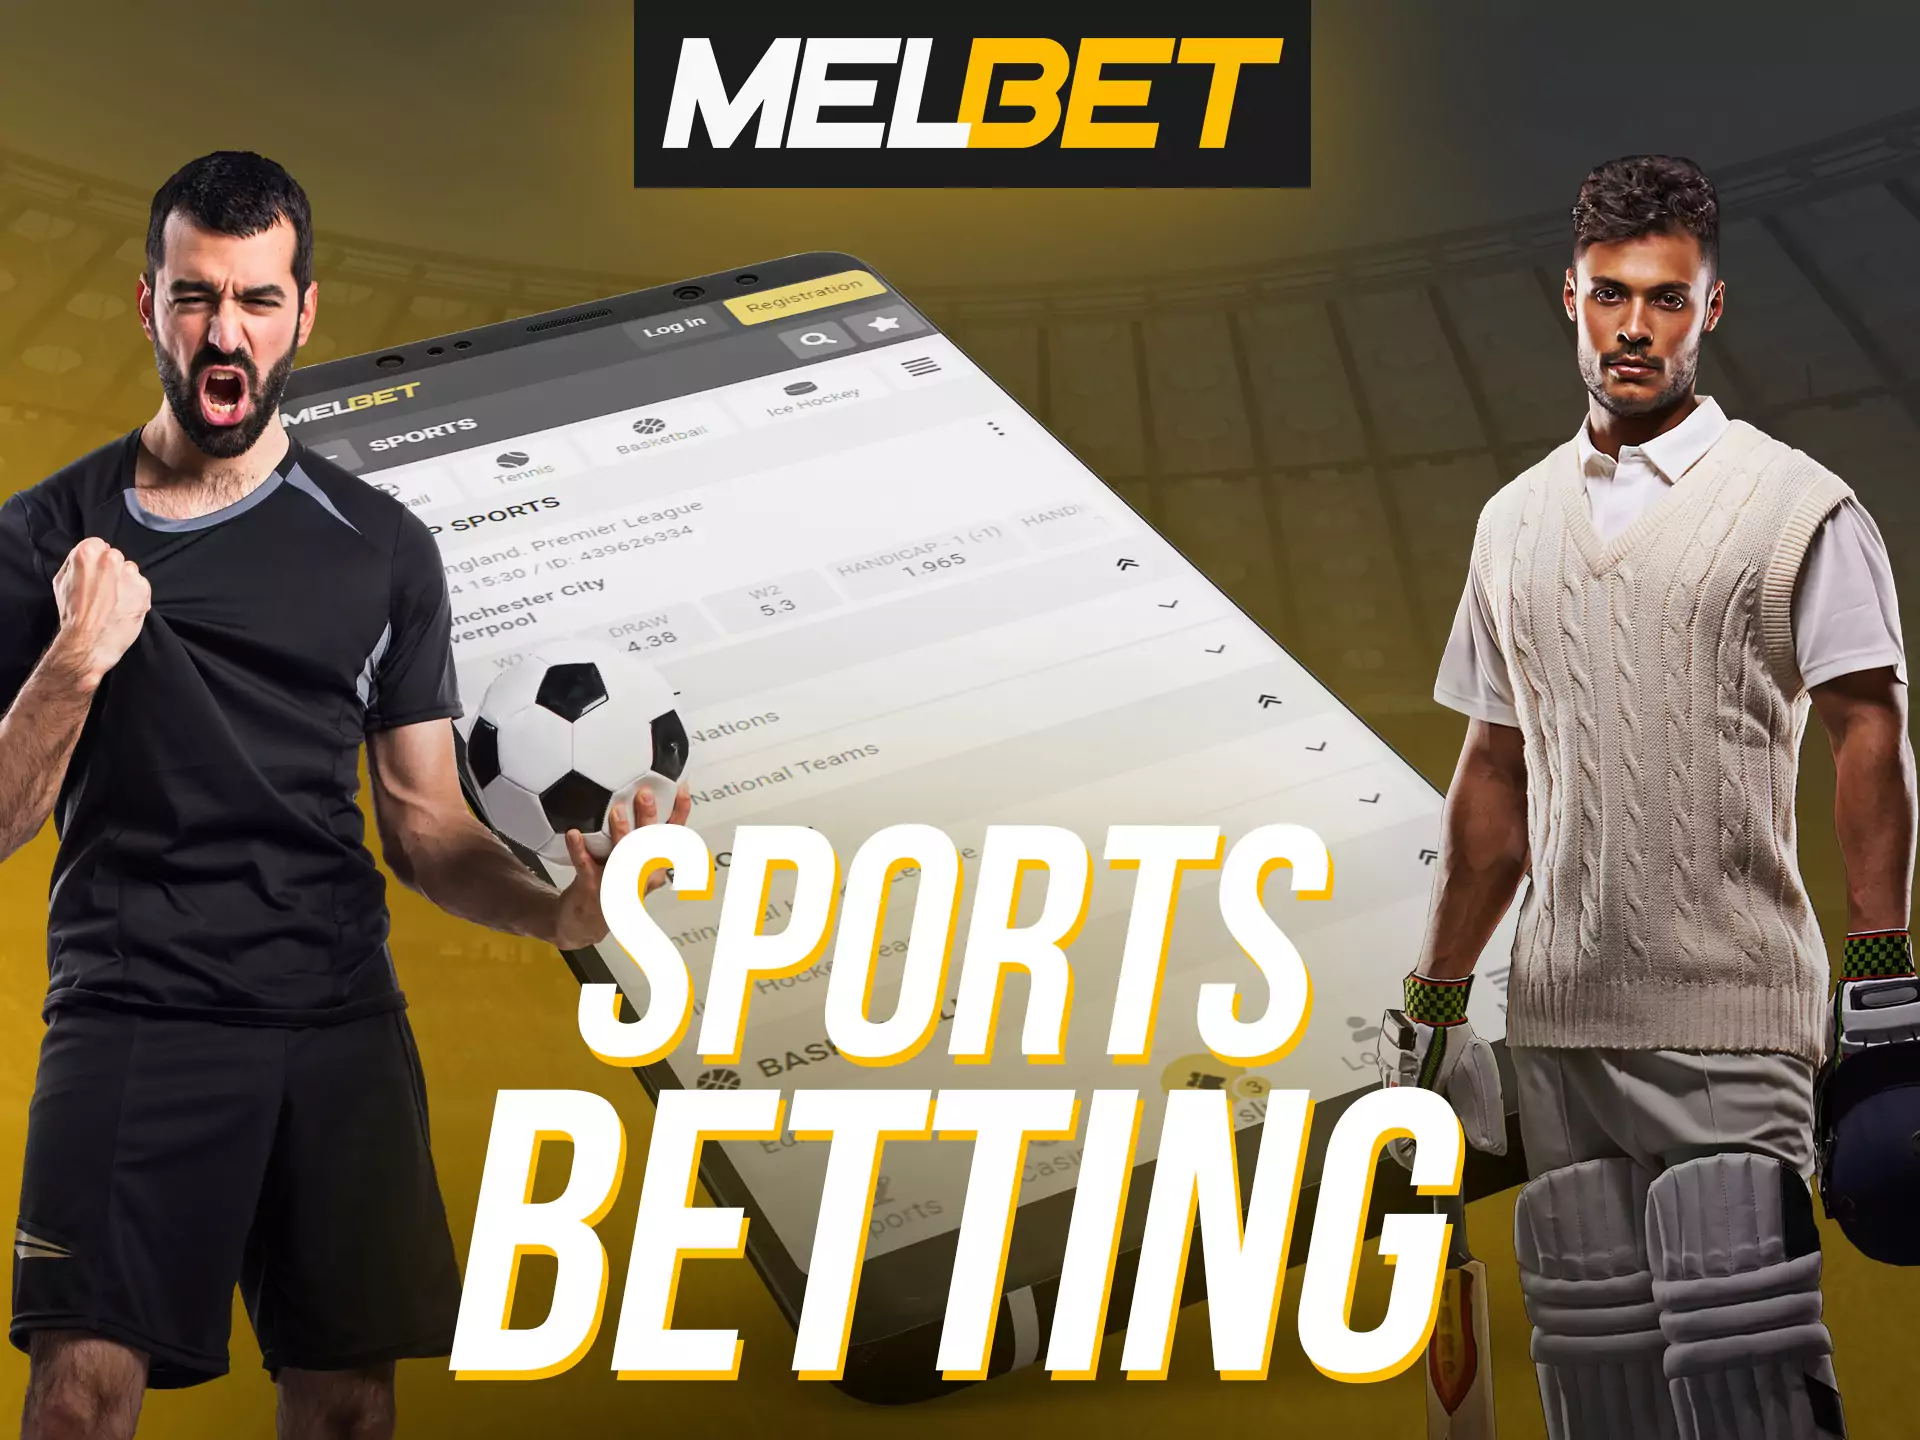 In the Melbet app you can bet on all kinds of sports.